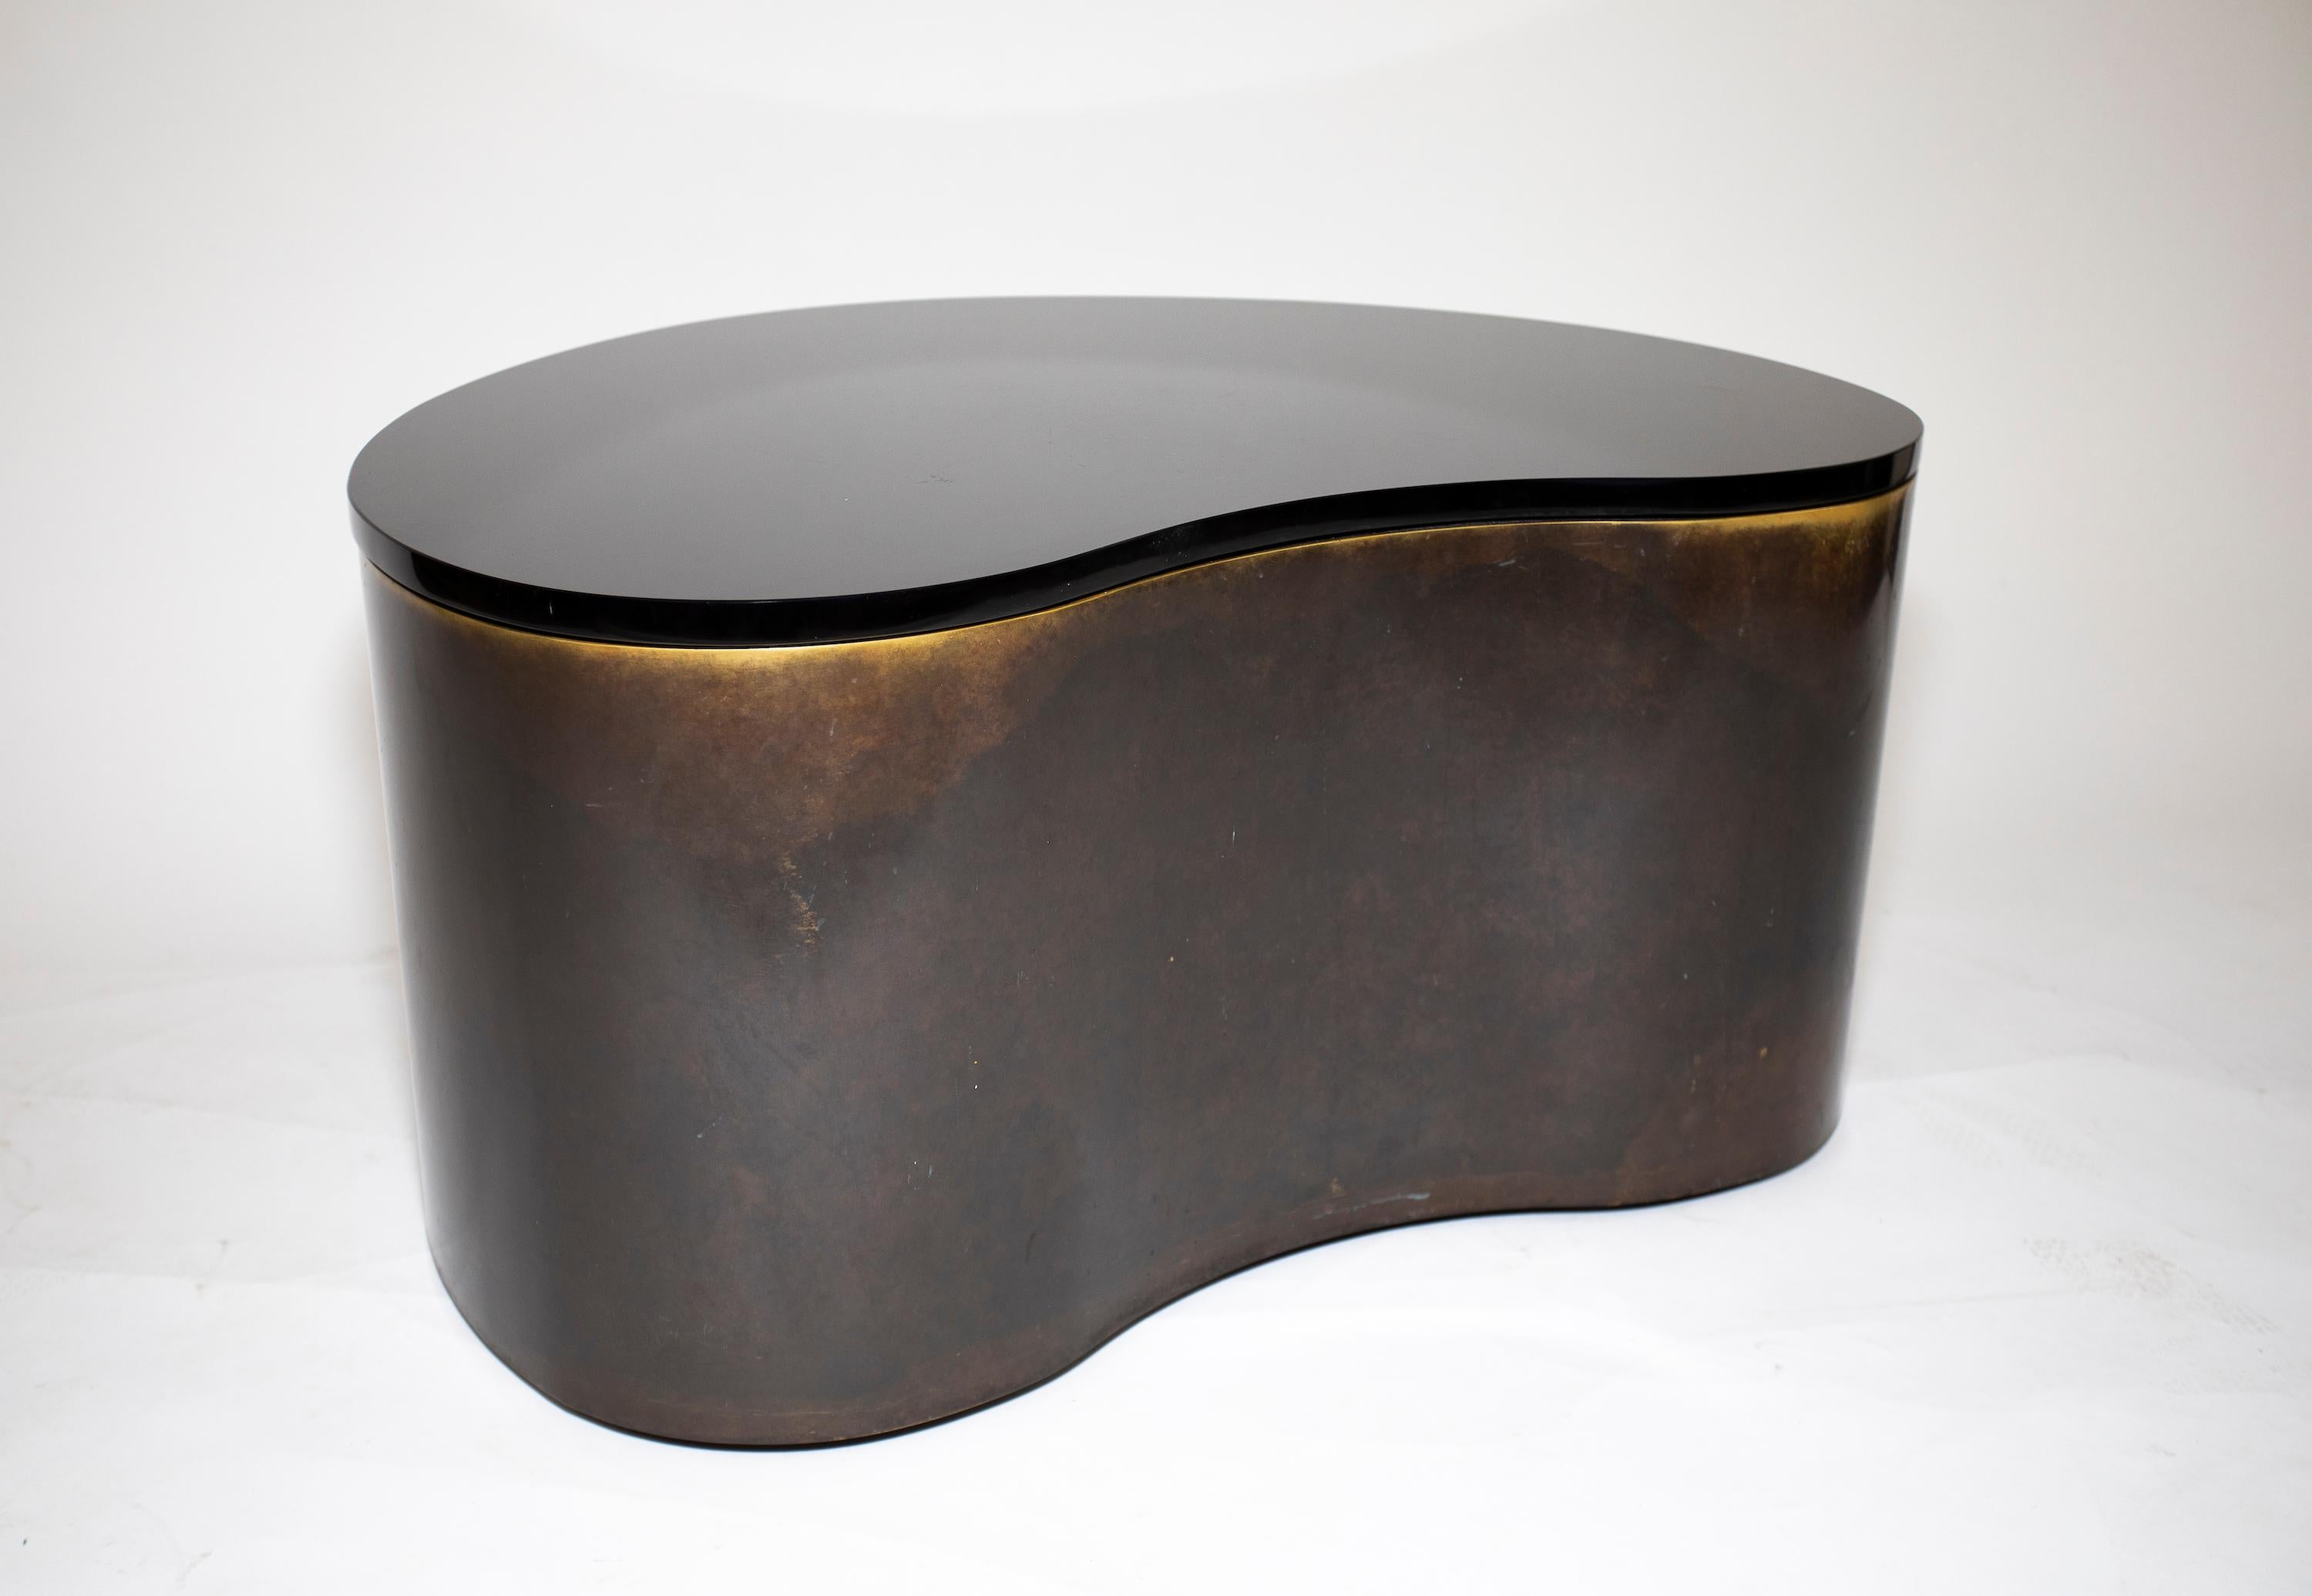 Karl Springer Amoeba table.
Bronze patinated brass and black glass top.